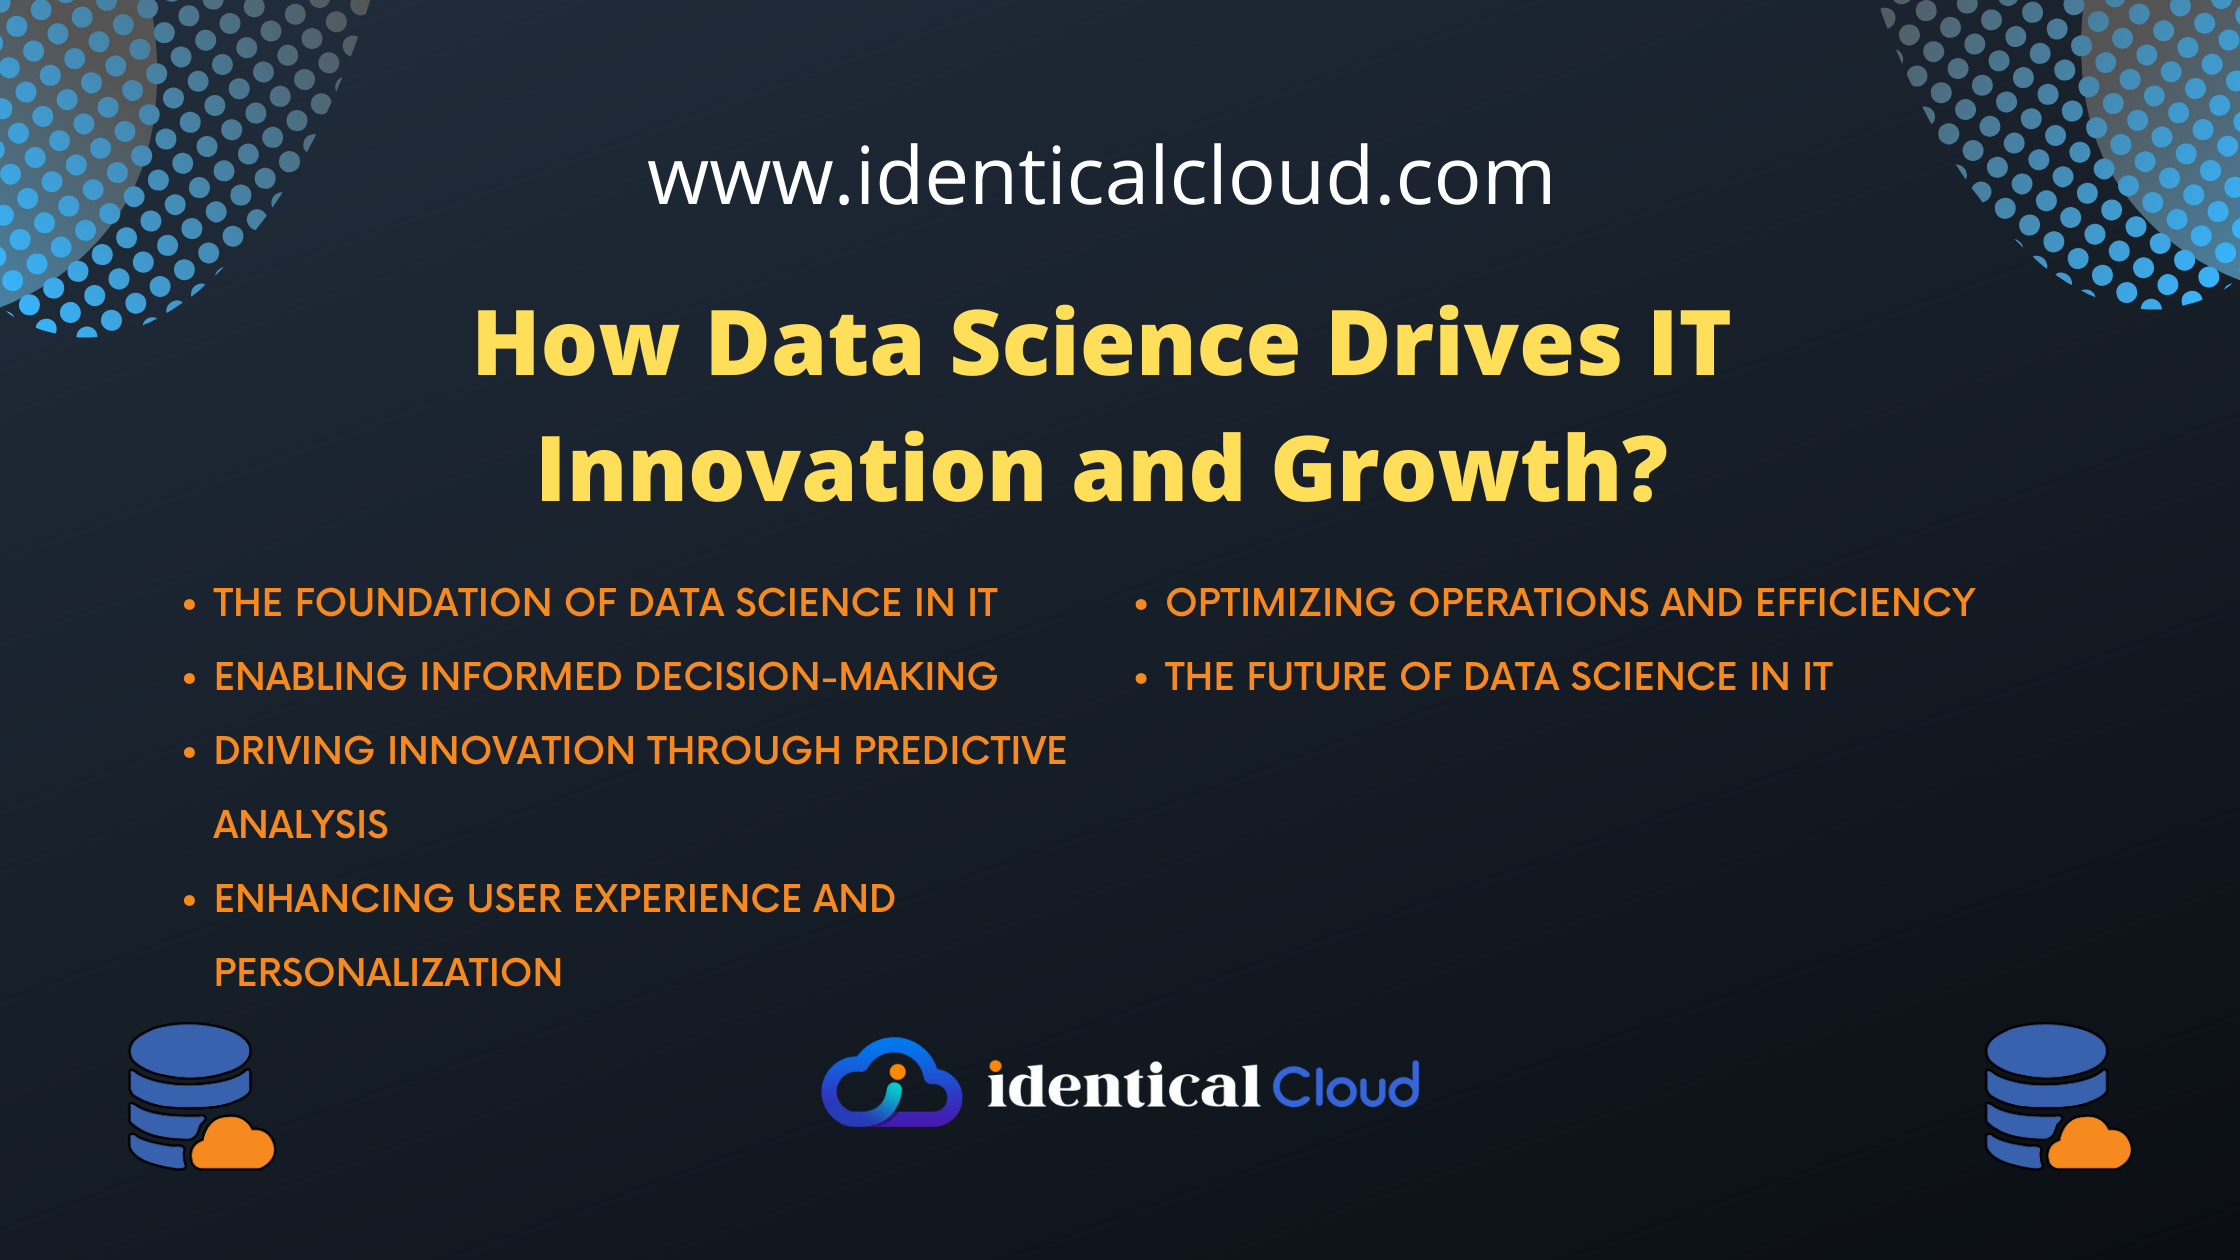 How Data Science Drives IT Innovation and Growth - identicalcloud.com